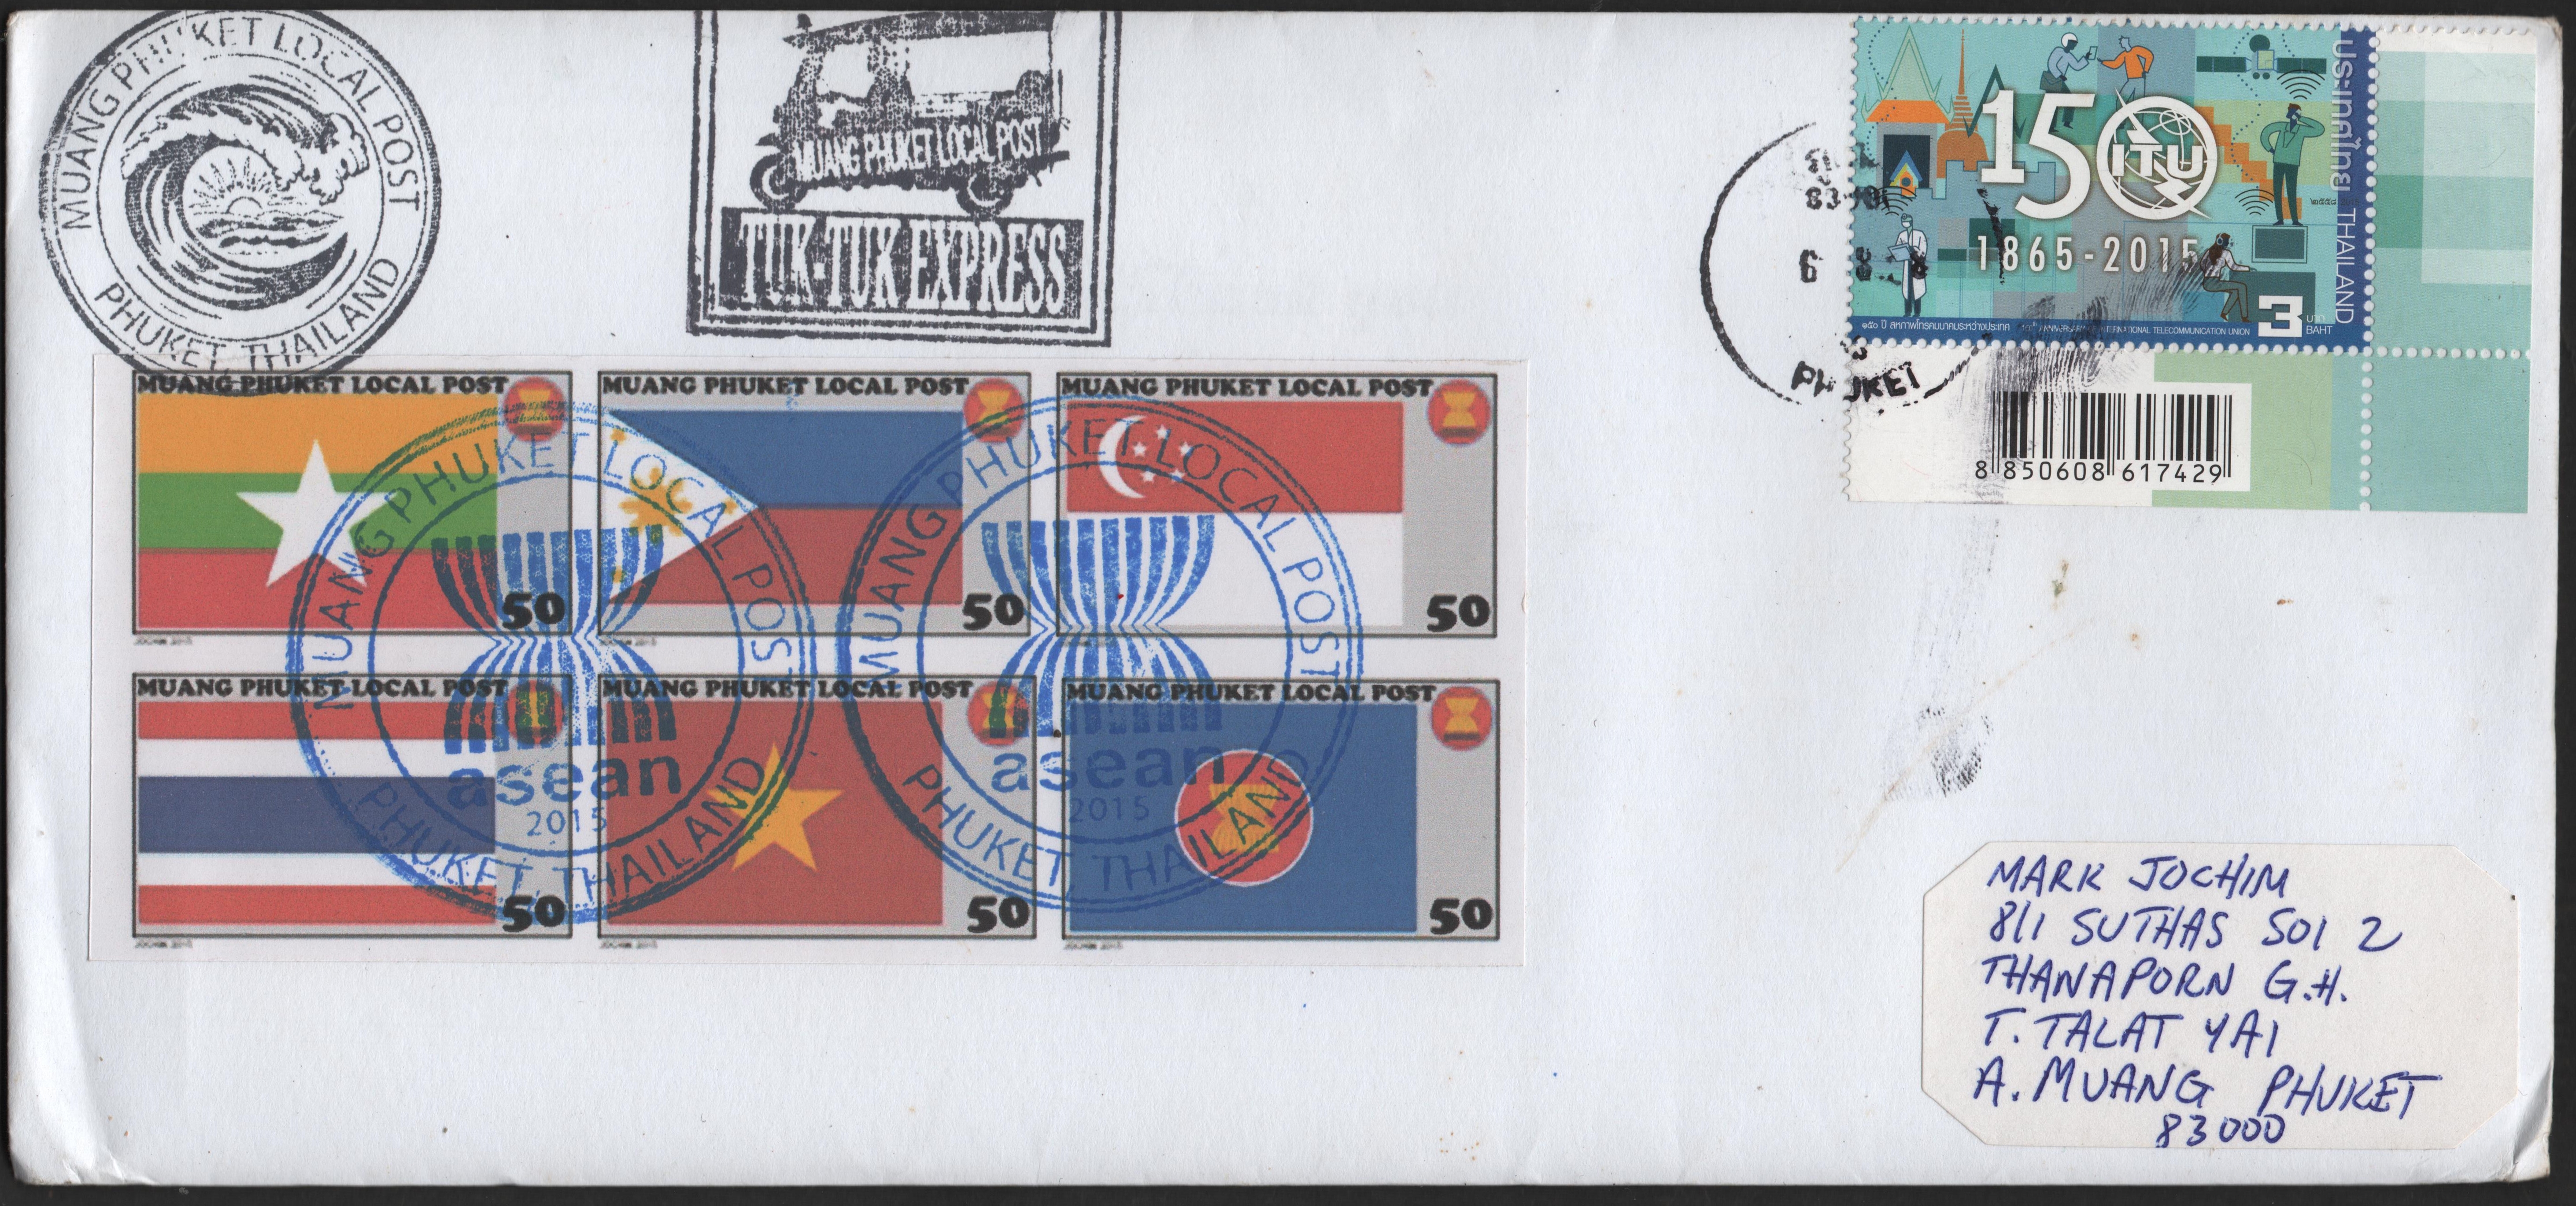 Muang Phuket Local Post - MPLP #21-26 (2015) on first day cover; 6 of 11 stamps in a set marking ASEAN Day, August 8, 2018. Conveyed my MPLP to Phuket Philatelic Museum, postmarked Phuket on August 8, 2018, where it entered the mailstream. This particular cover took ten days to arrive at my home, less than 2 miles from the post office!